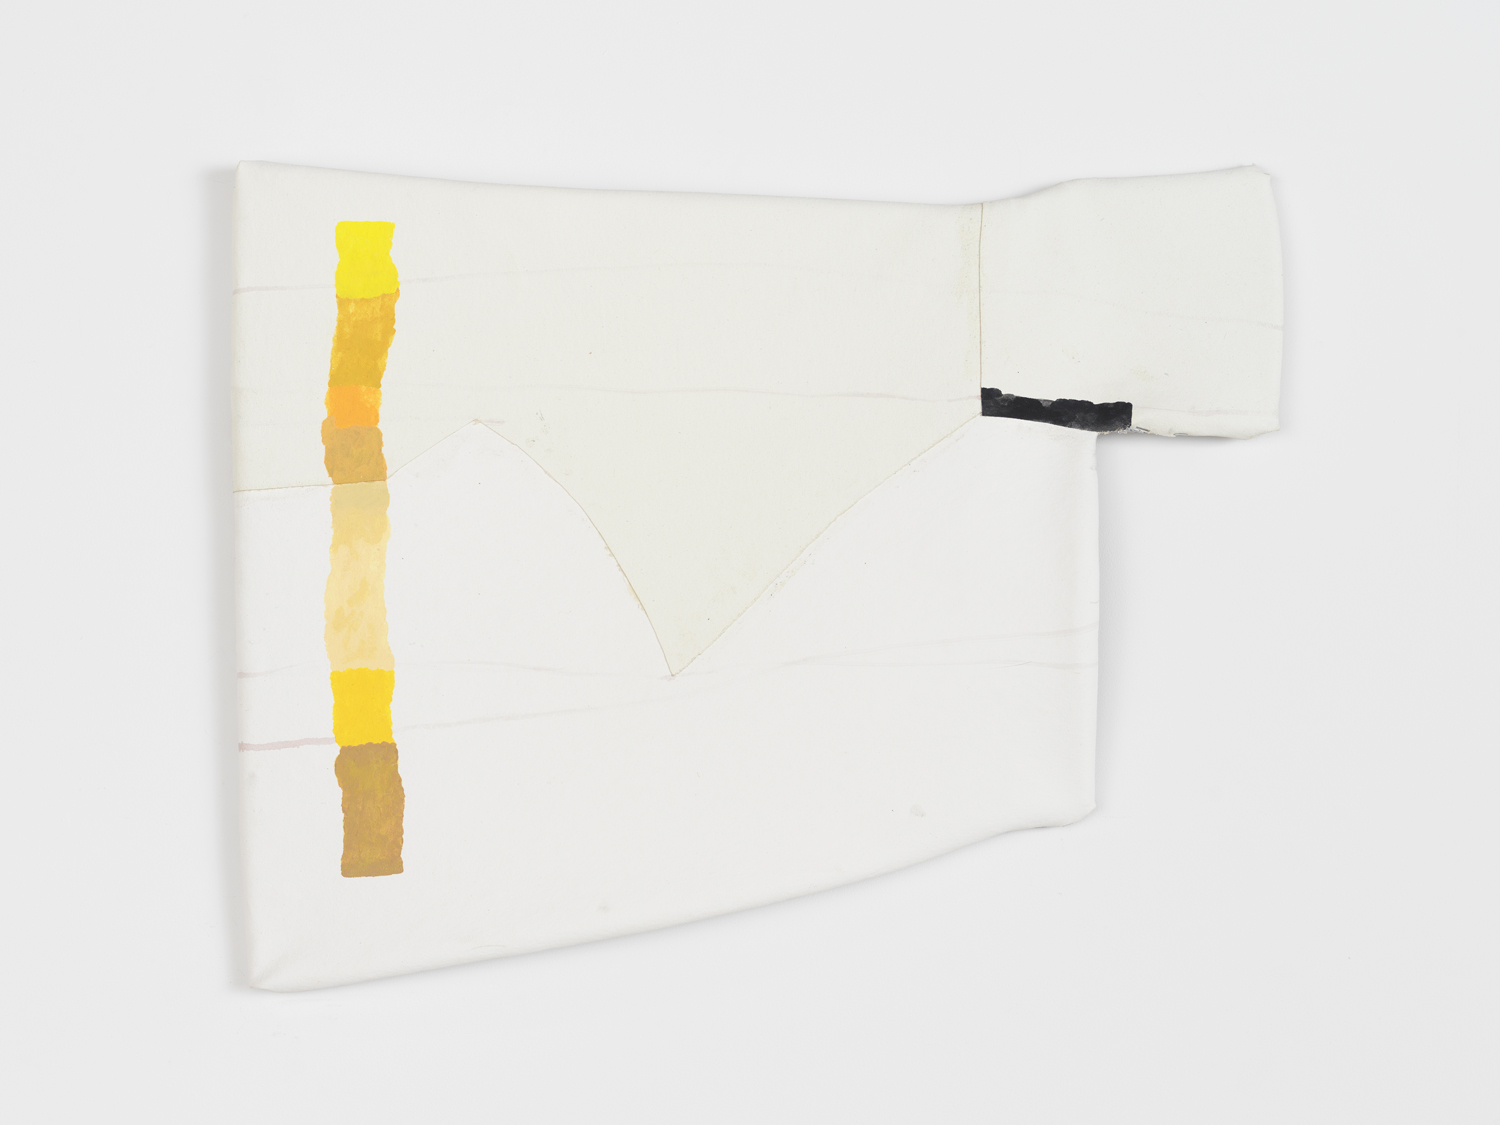 Linnea Kniaz, Yellow, Fitting Into, 2019, acrylic on canvas stretched onto vinyl tubing, 22.5h x 29w in.